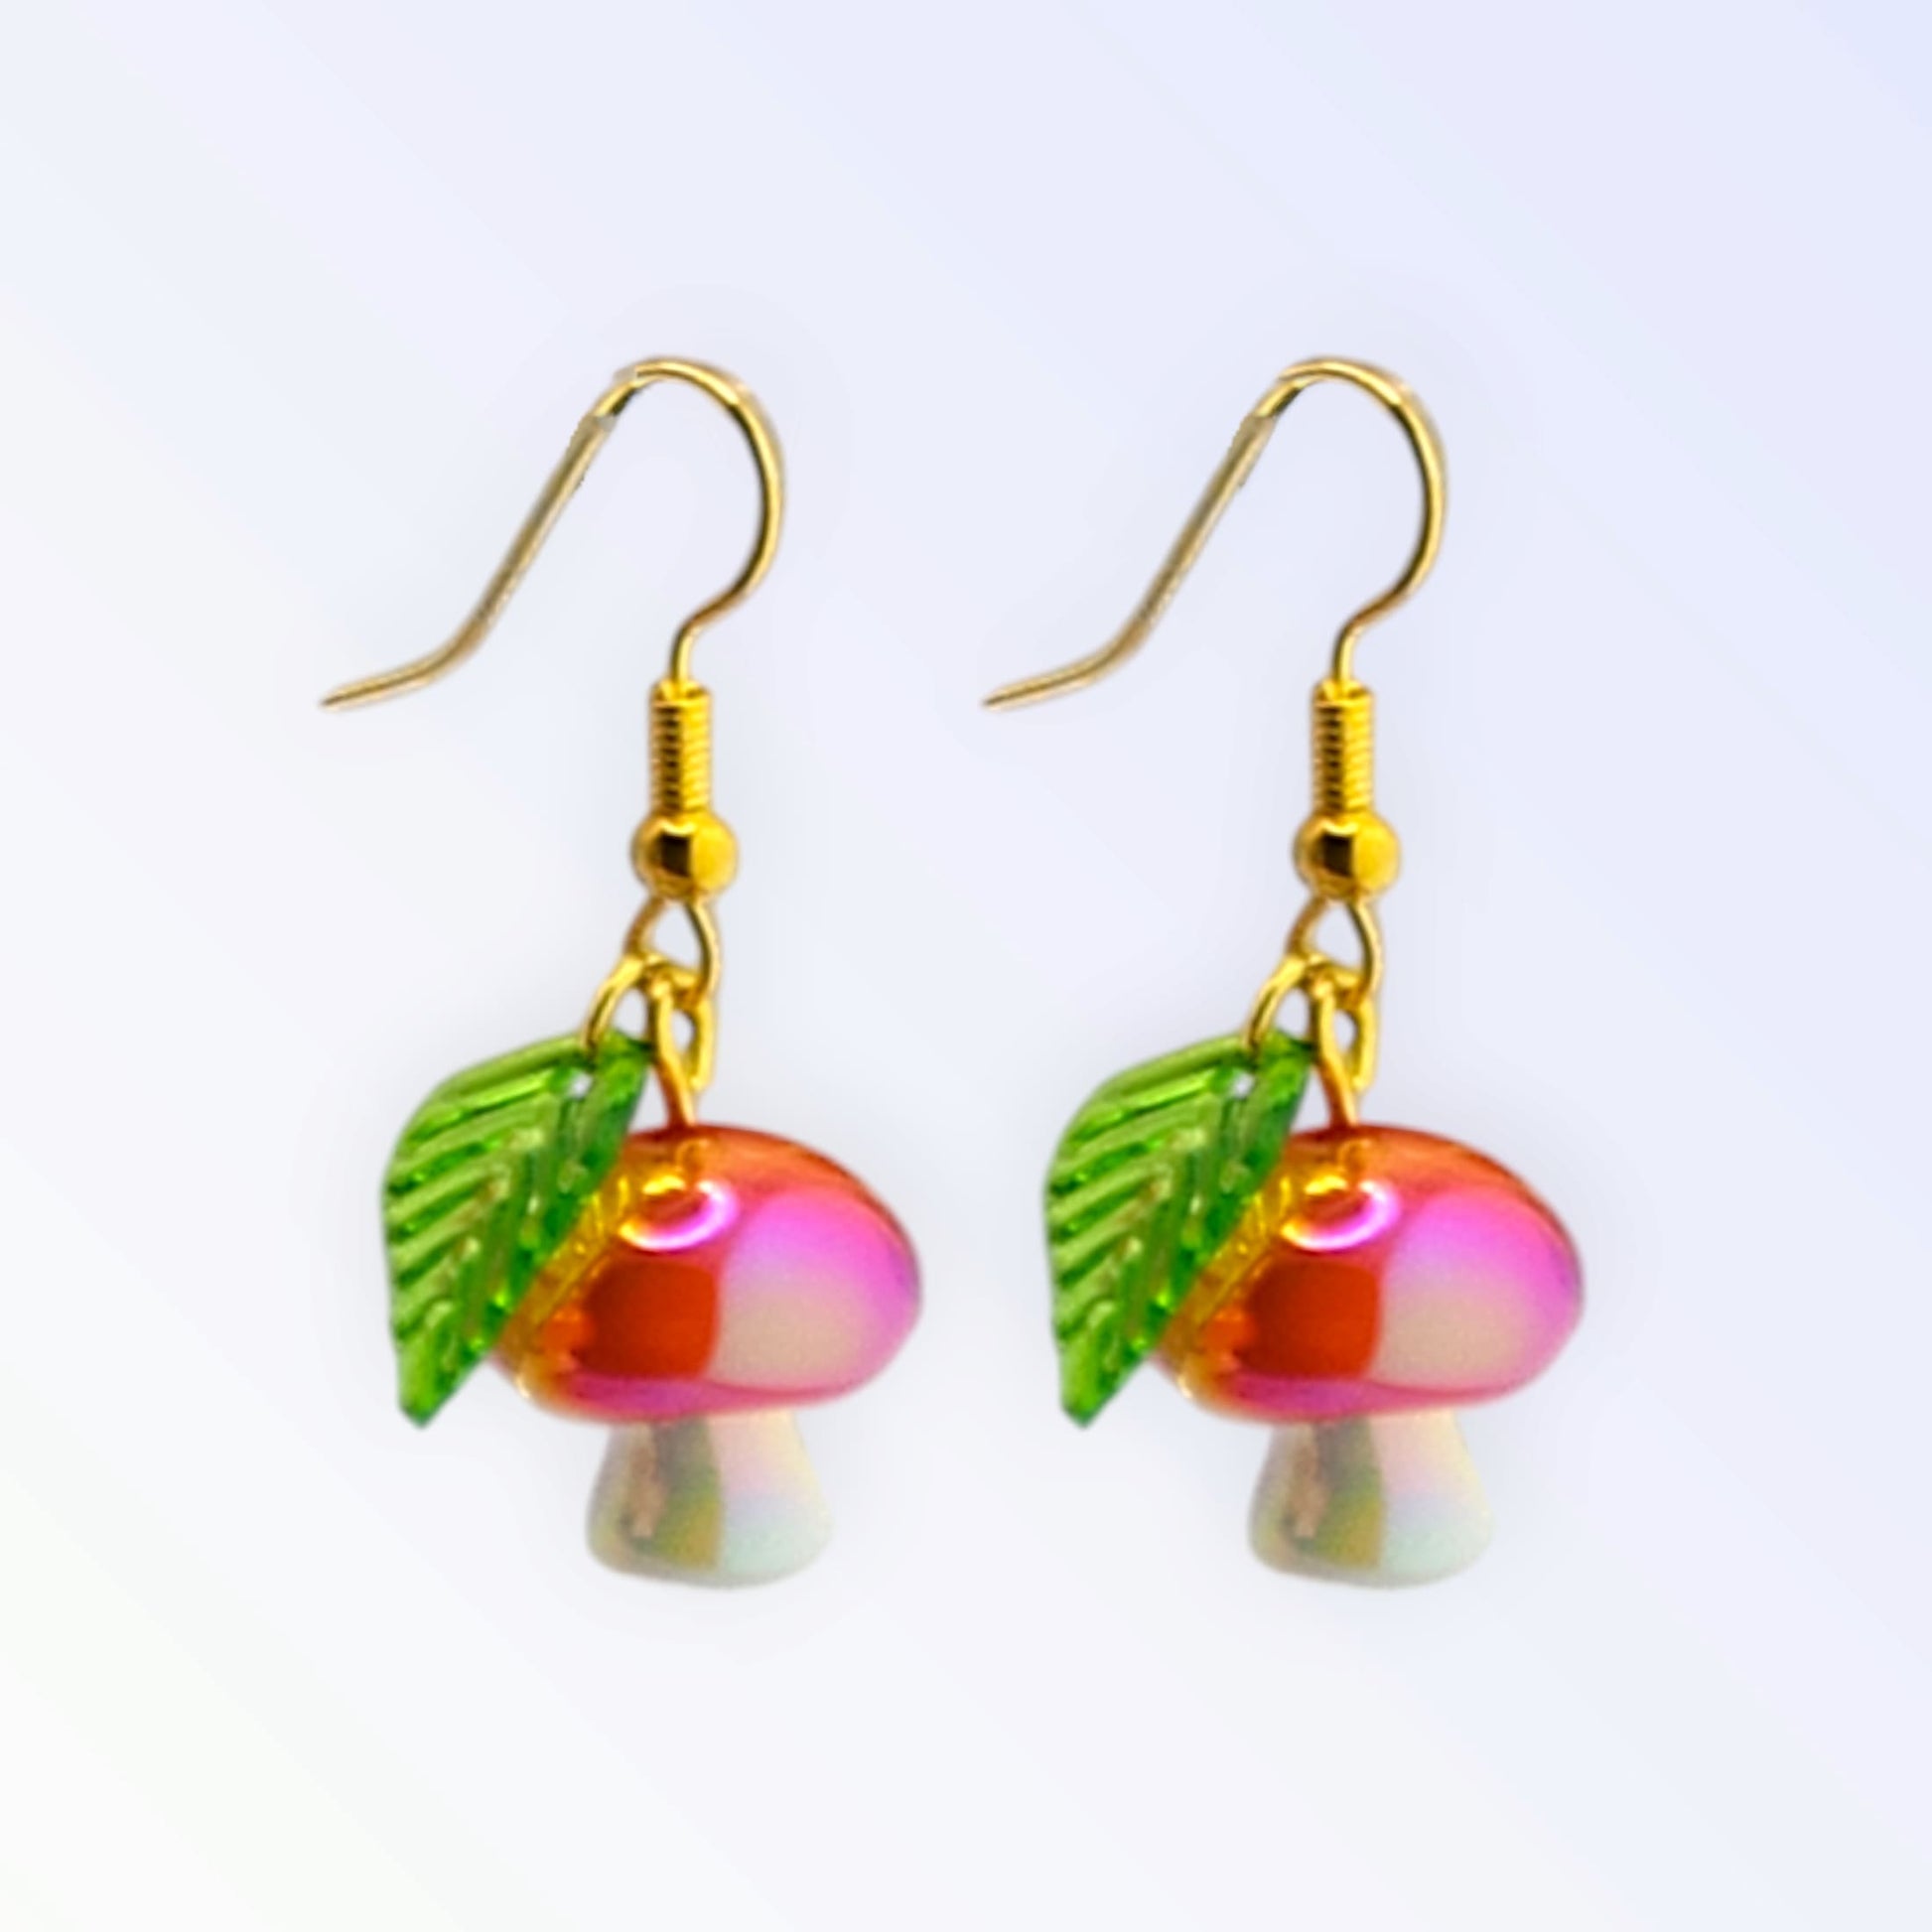 Iridescent Mushroom Earrings from Confetti Kitty, Only 8